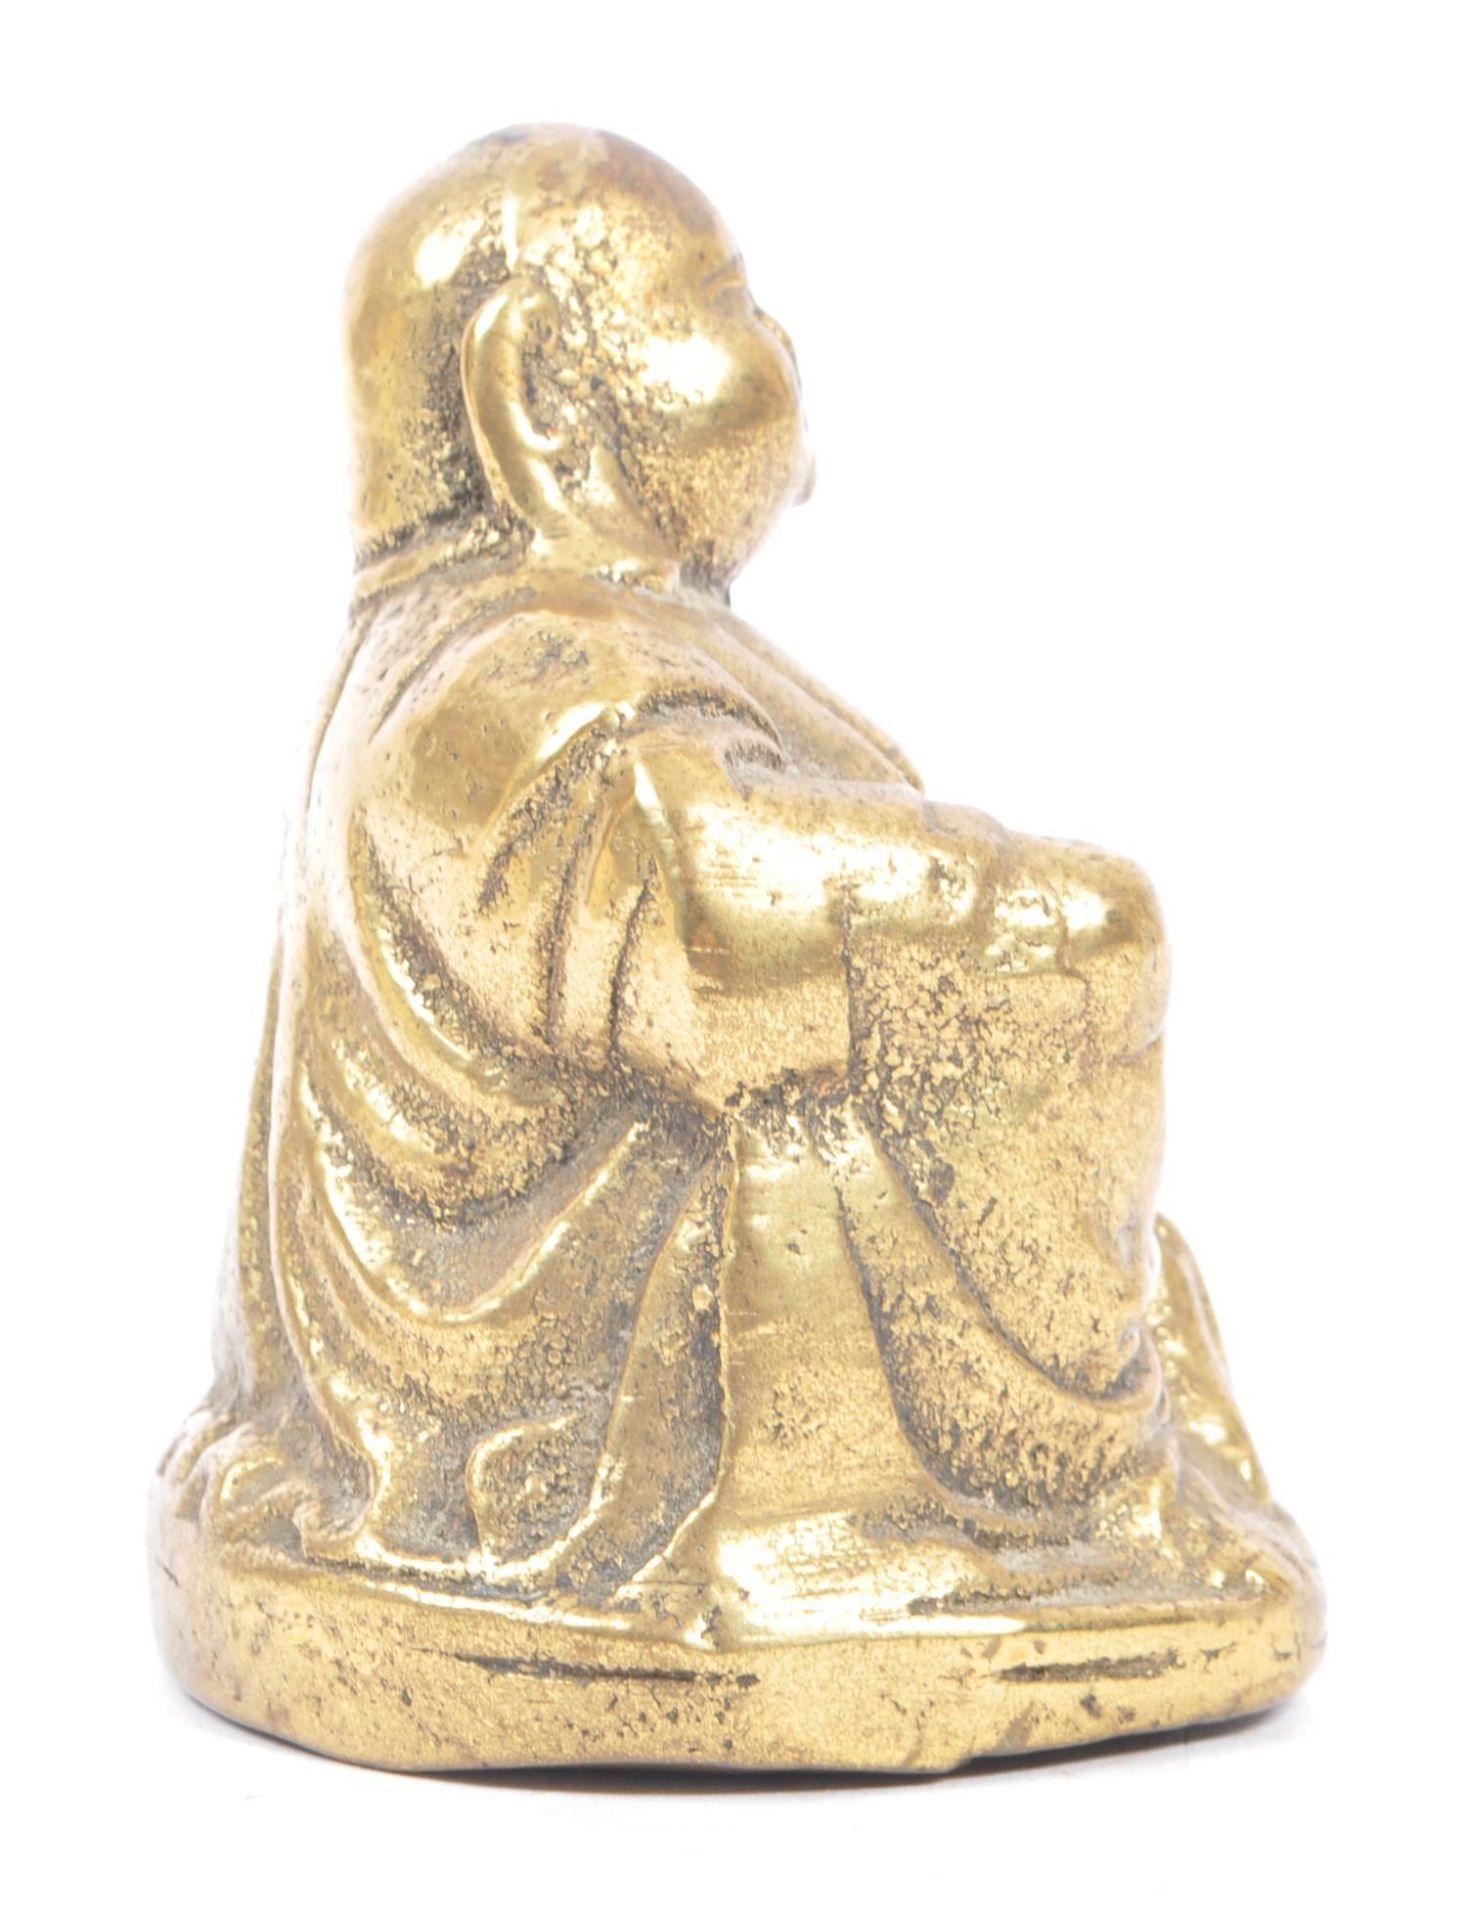 CHINESE EARLY 20TH CENTURY BRASS LAUGHING BUDDHA FIGURE - Image 2 of 6